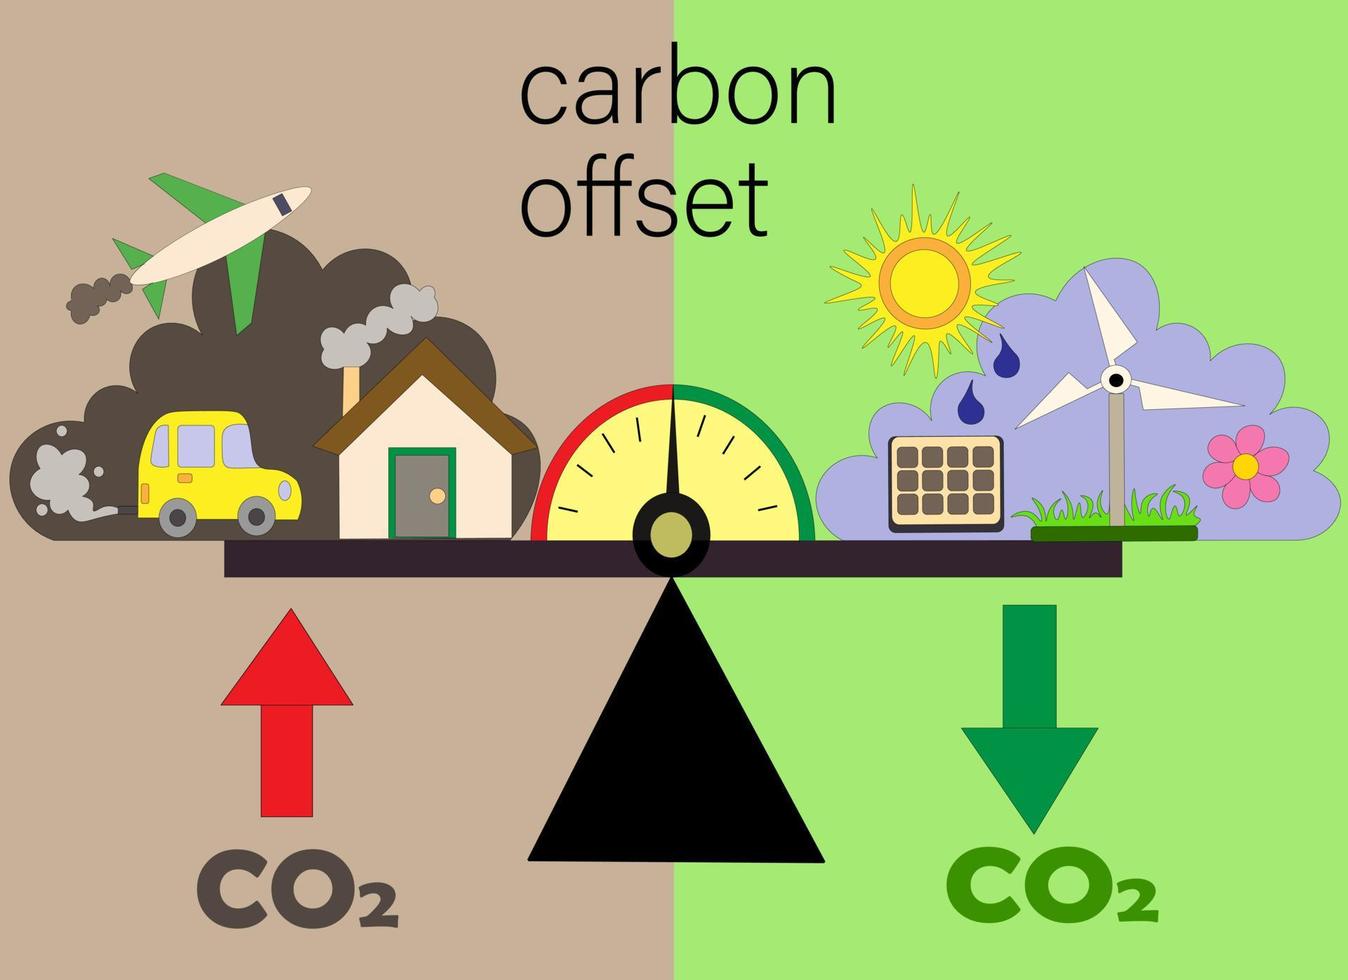 carbon offset compensation. carbon neutral. scales of transport and factory emissions and carbon and greenhouse gas CO2 absorption. illustrations of a zero or neutral environment strategy. vector